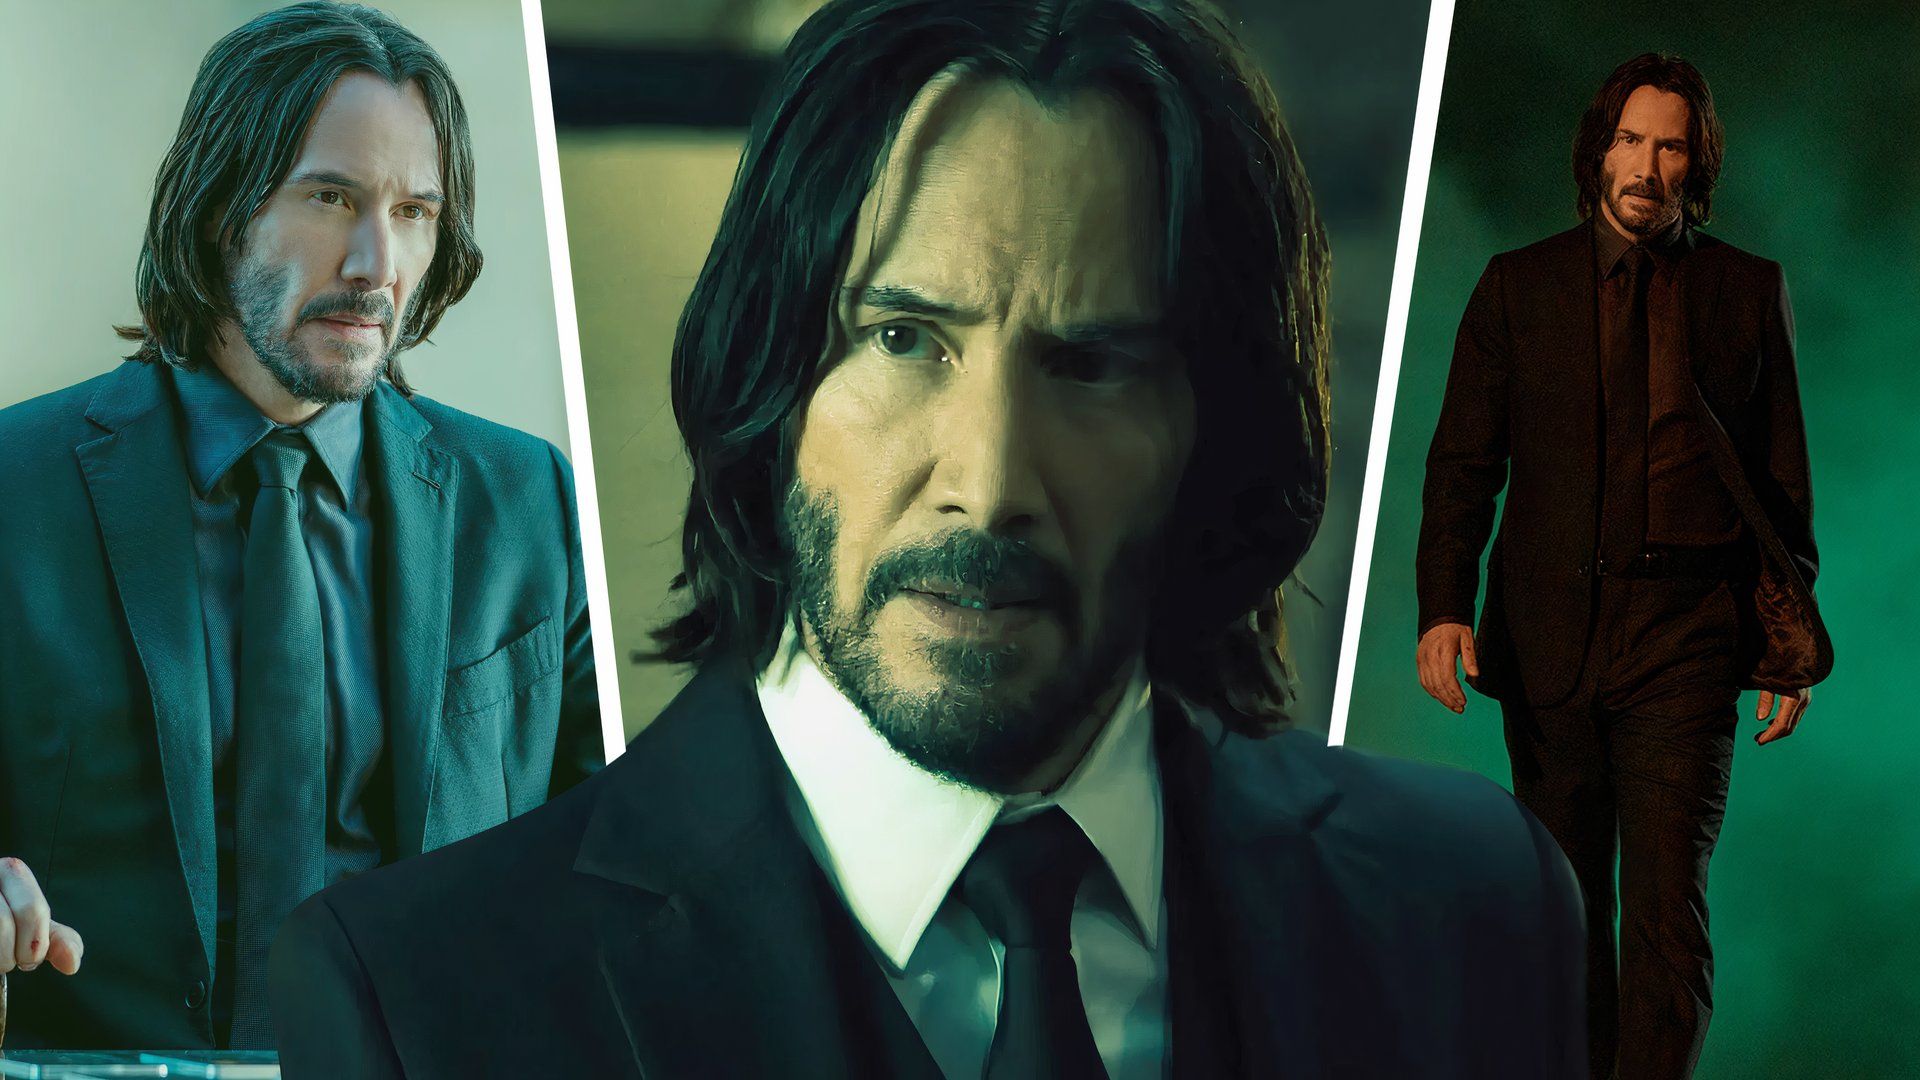 An edited image of Keanu Reeves wearing a black suit and tie as John Wick in John Wick: Chapter 4